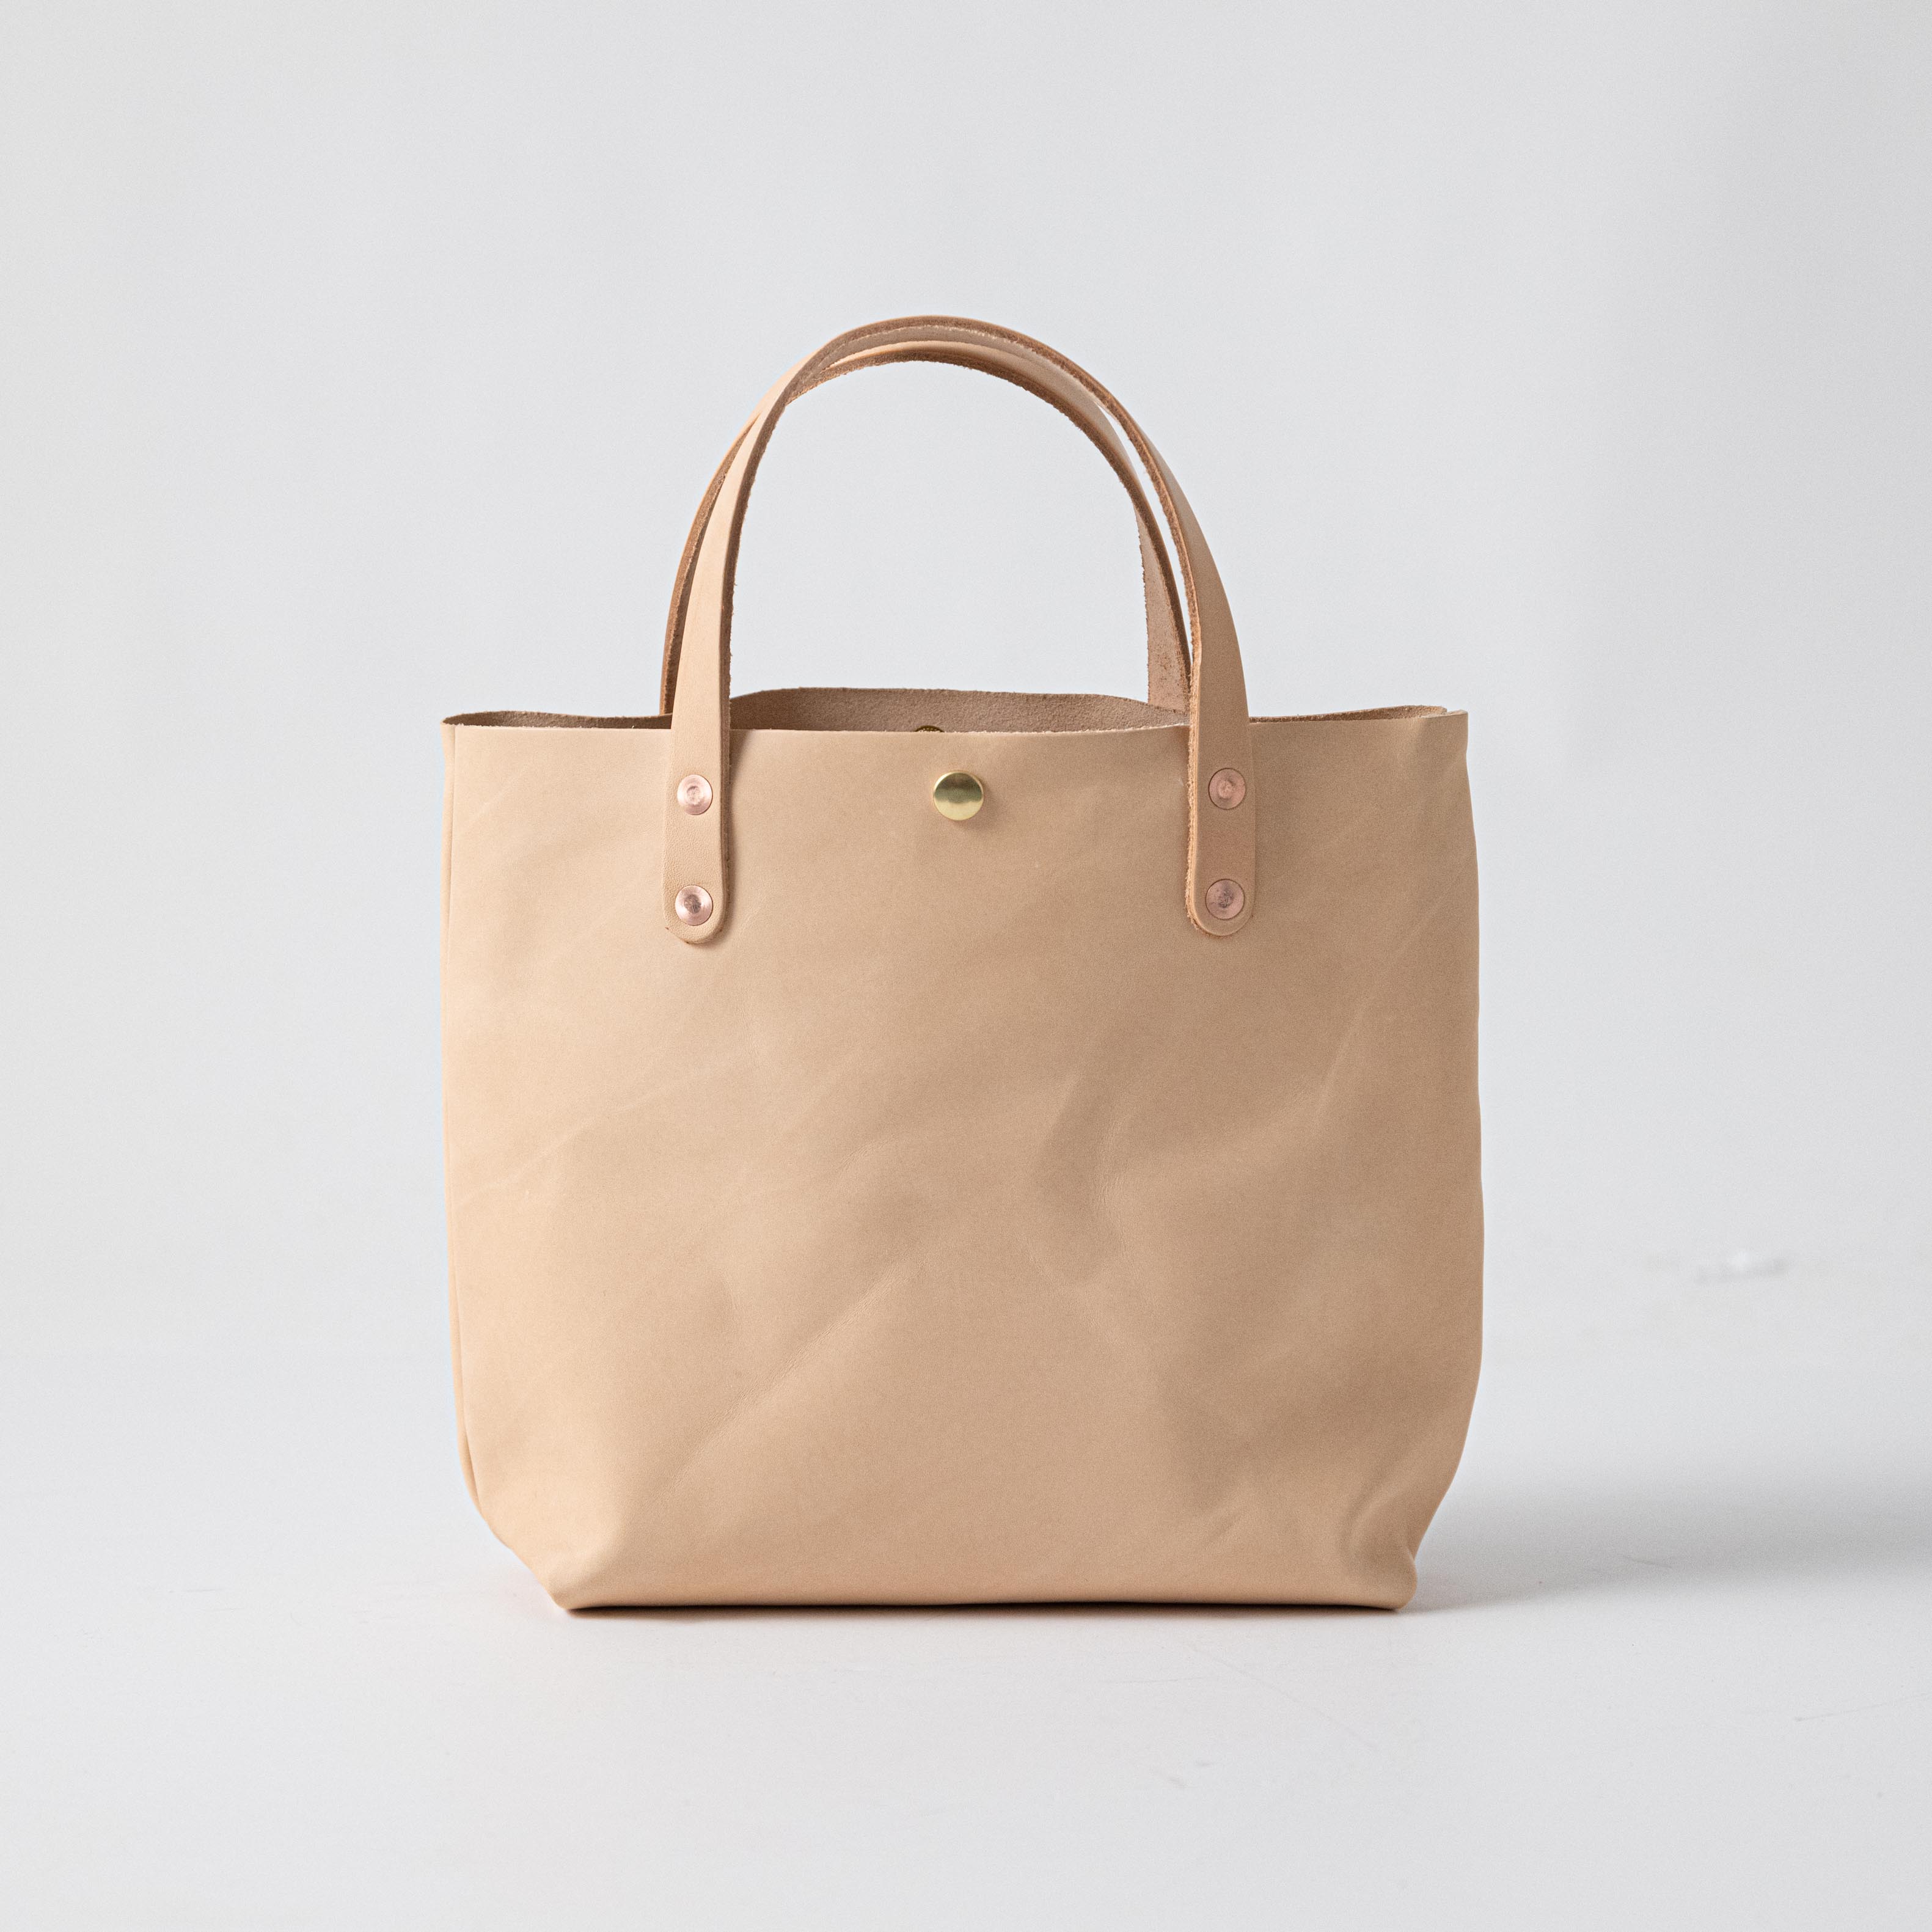 Leather Tote Bag: Vegetable Tan Mini Tote | leather bags KMM & Co.